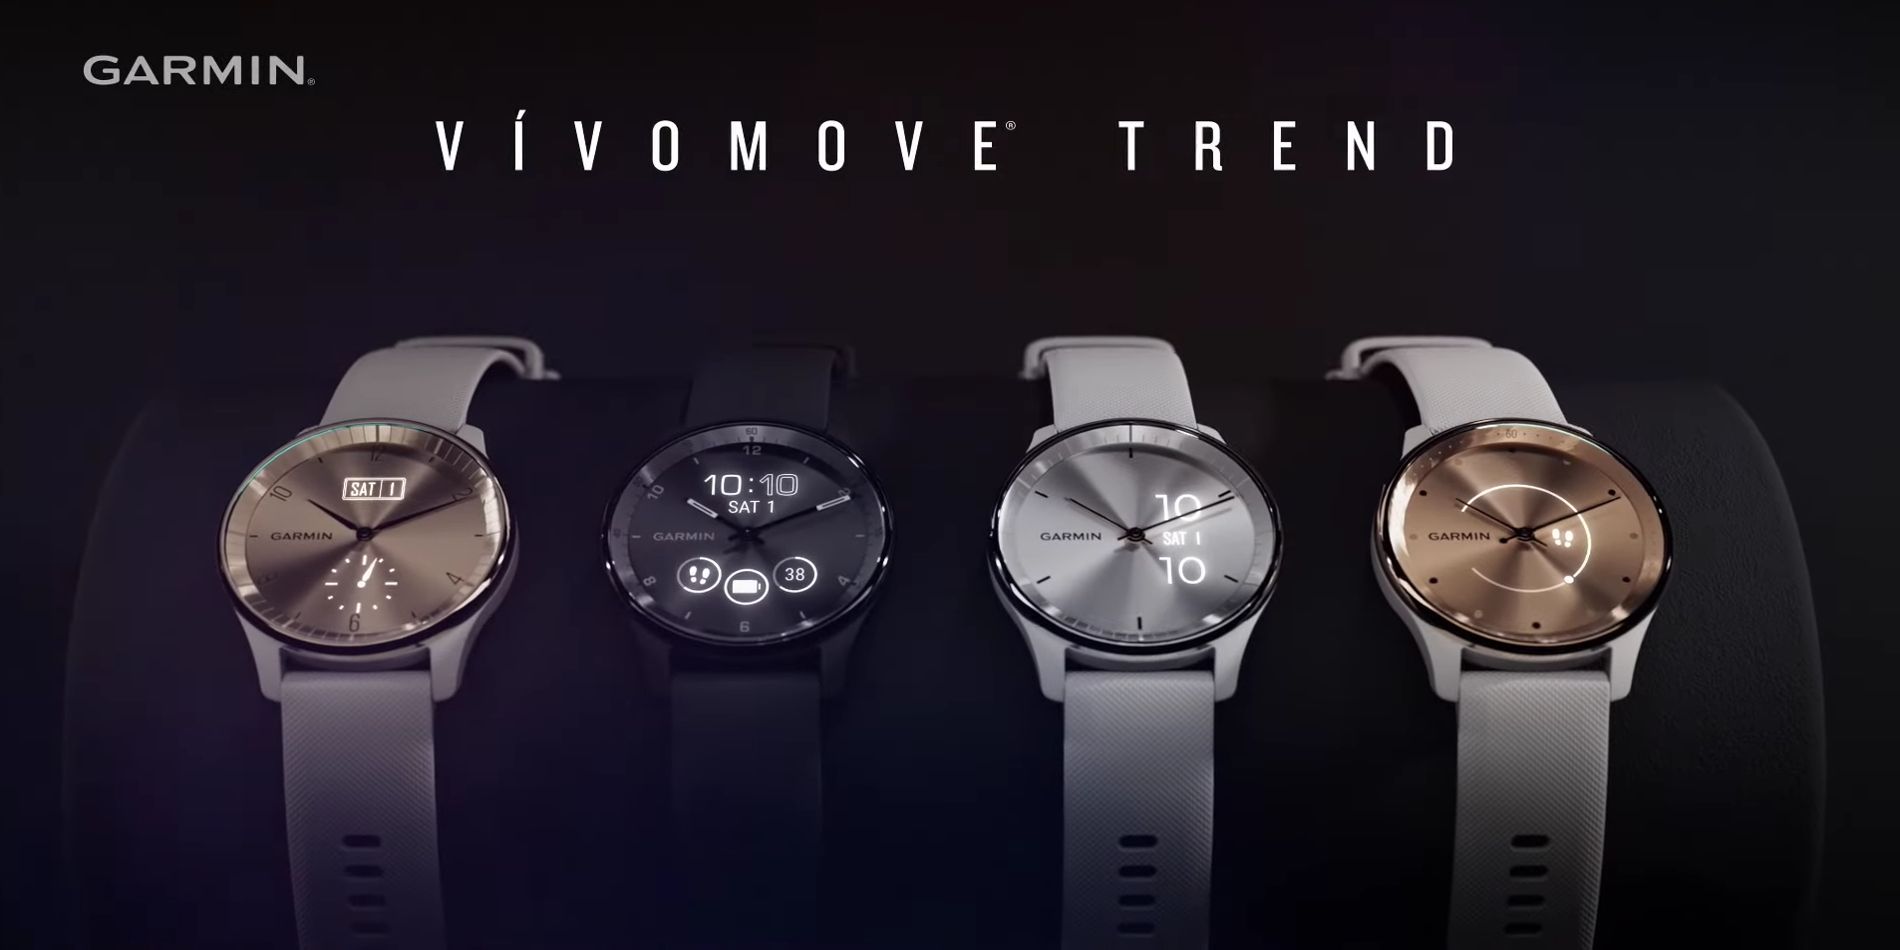 A photo showing the Vivomove Trend smartwatch in four colors